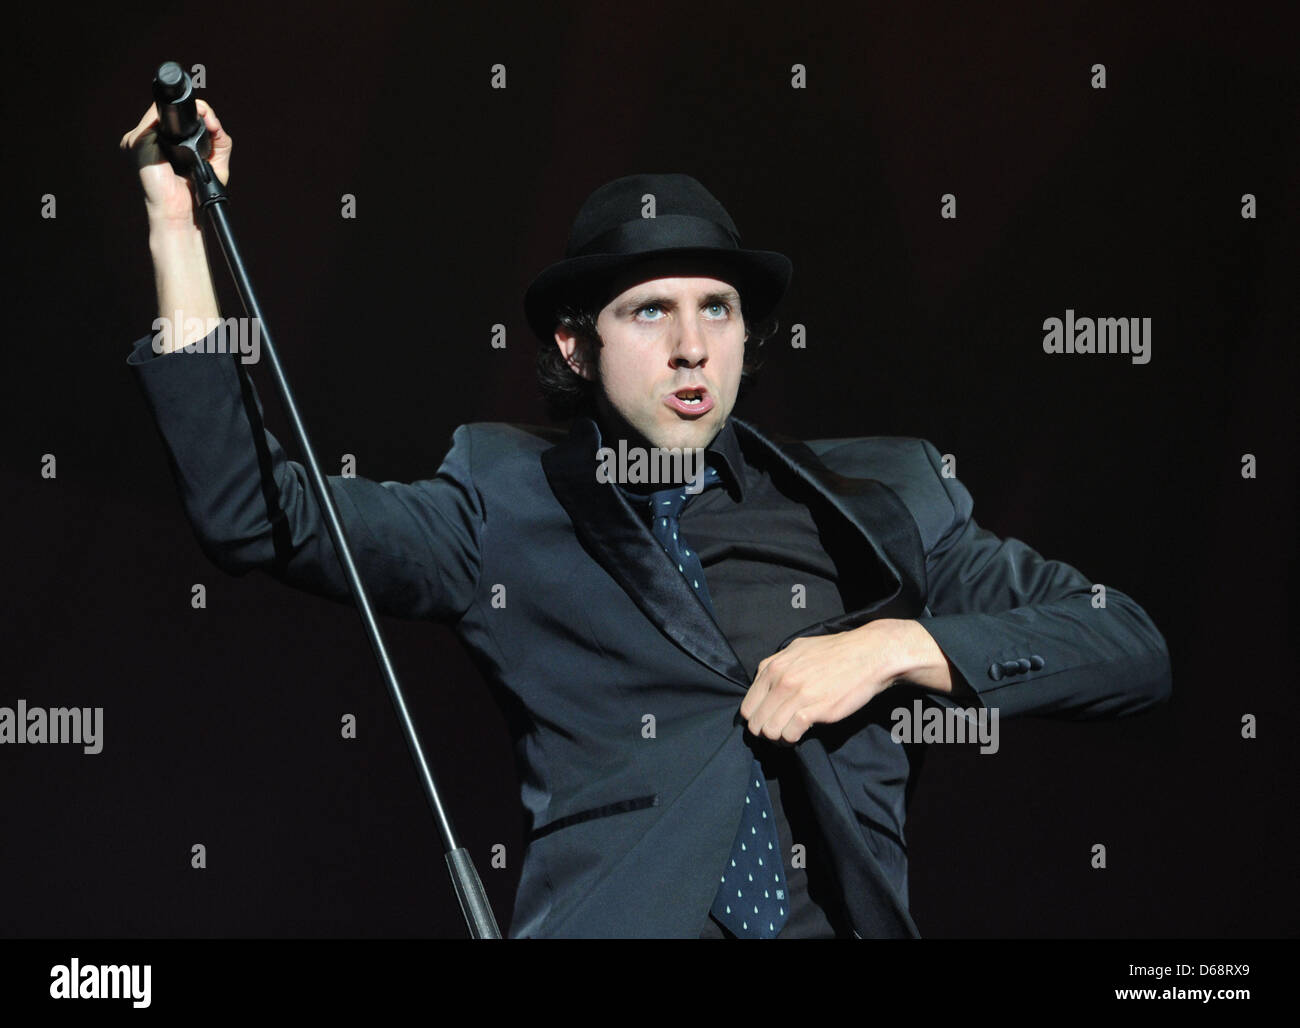 Singer Paul Smith of music group Maximo Park performs at the open air  festival 'Das Fest' at Guenther Klotz compley in Karlsruhe, Germany, 20  July 2012. Numerous musicians will perform on several